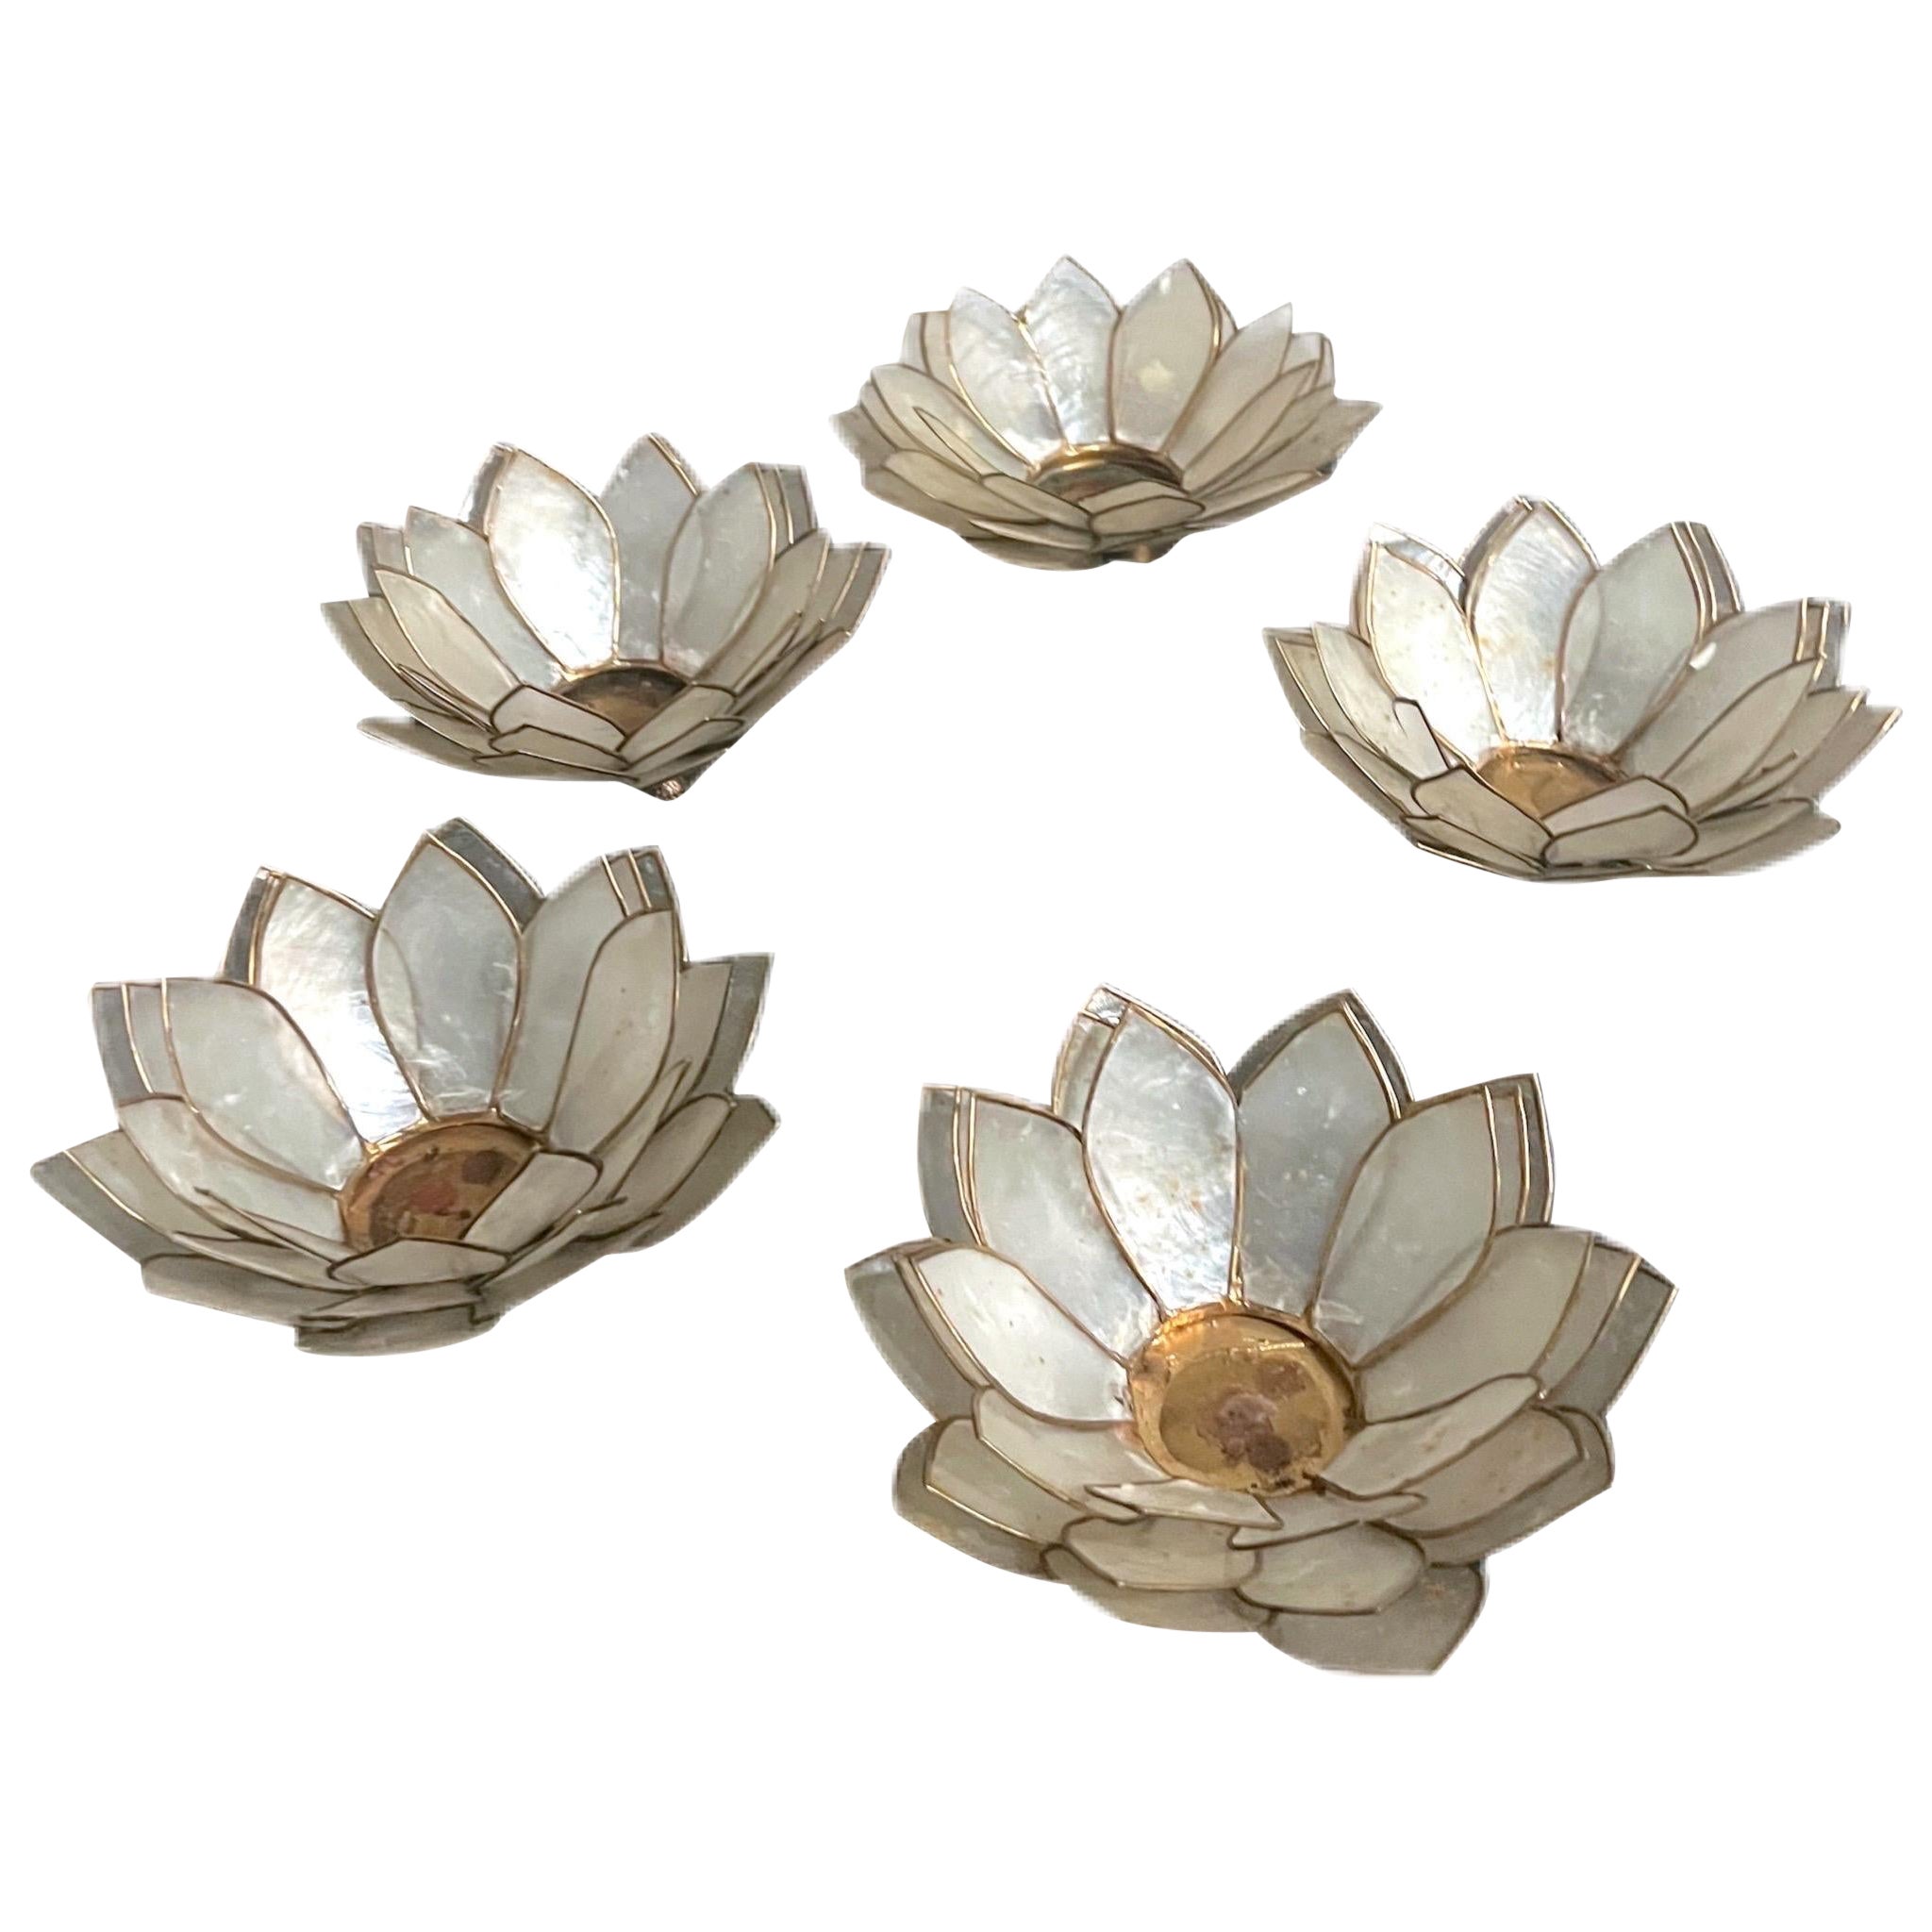 1970’s Capiz Shell Lotus Form Candle Holders, a Set of 5